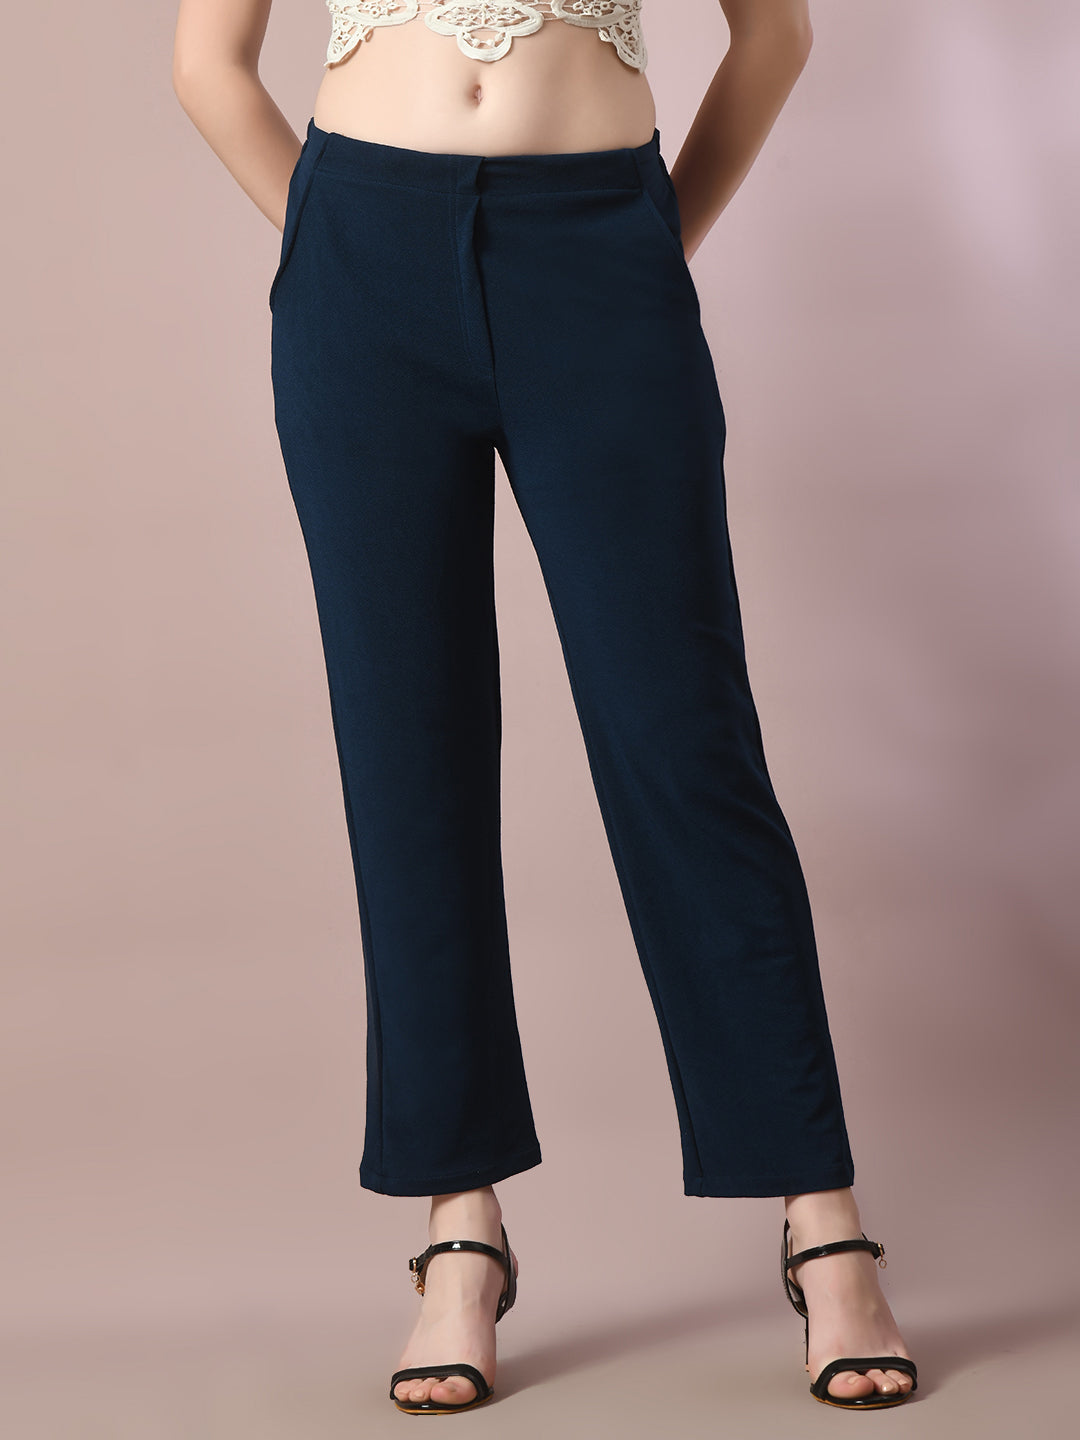 Women's Navy Blue Solid Party Straight Trousers - Myshka